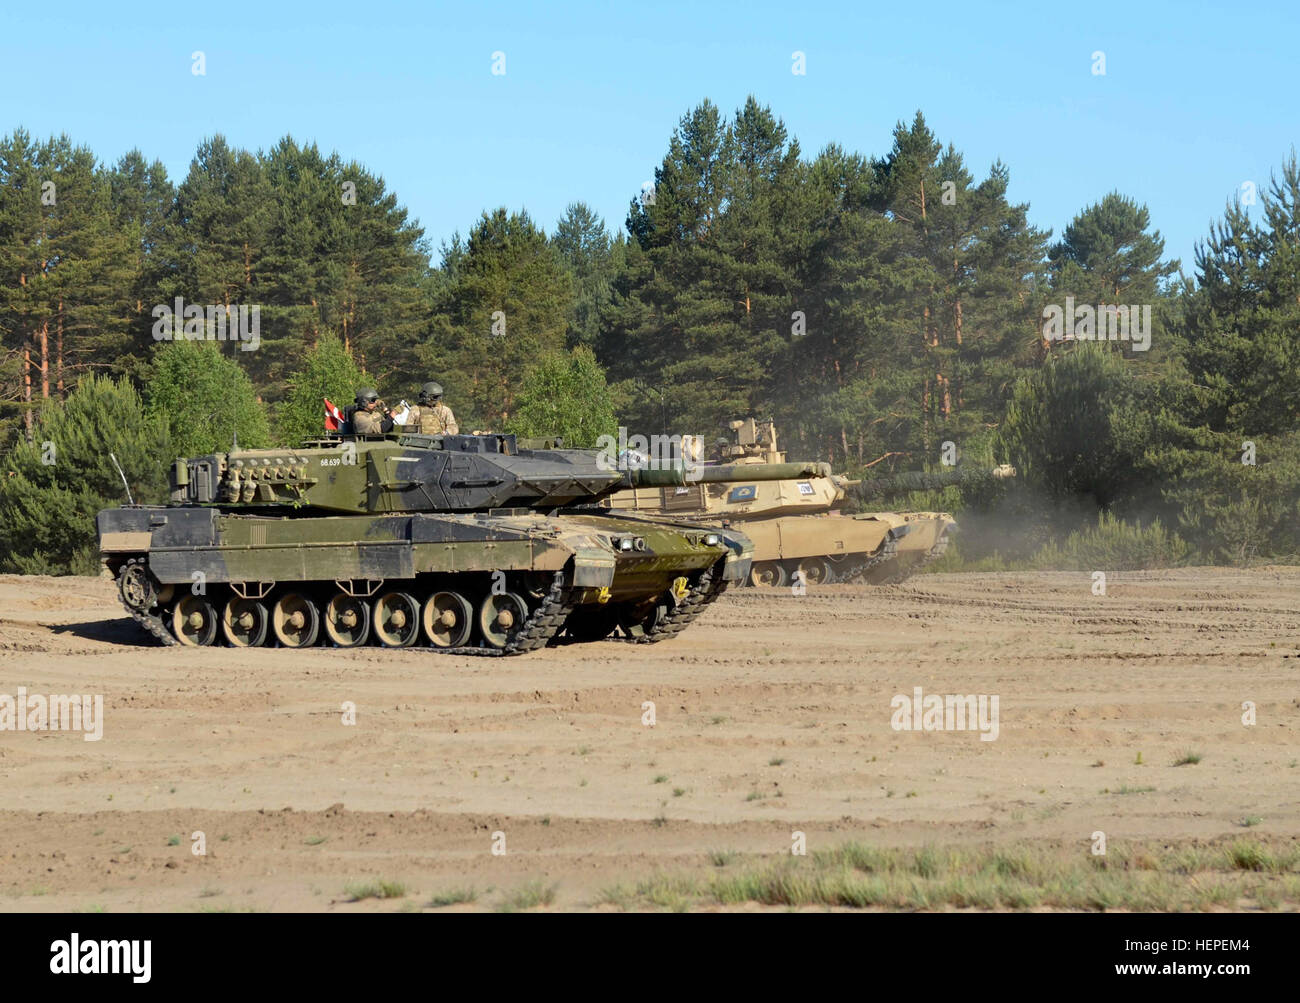 U.S. Army tank crews assigned to Company D, 2nd Battalion, 7th Infantry Regiment, 1st Armored Brigade Combat Team, Division, maneuver their M1A2 Abrams Battle Tanks alongside Danish Army tank